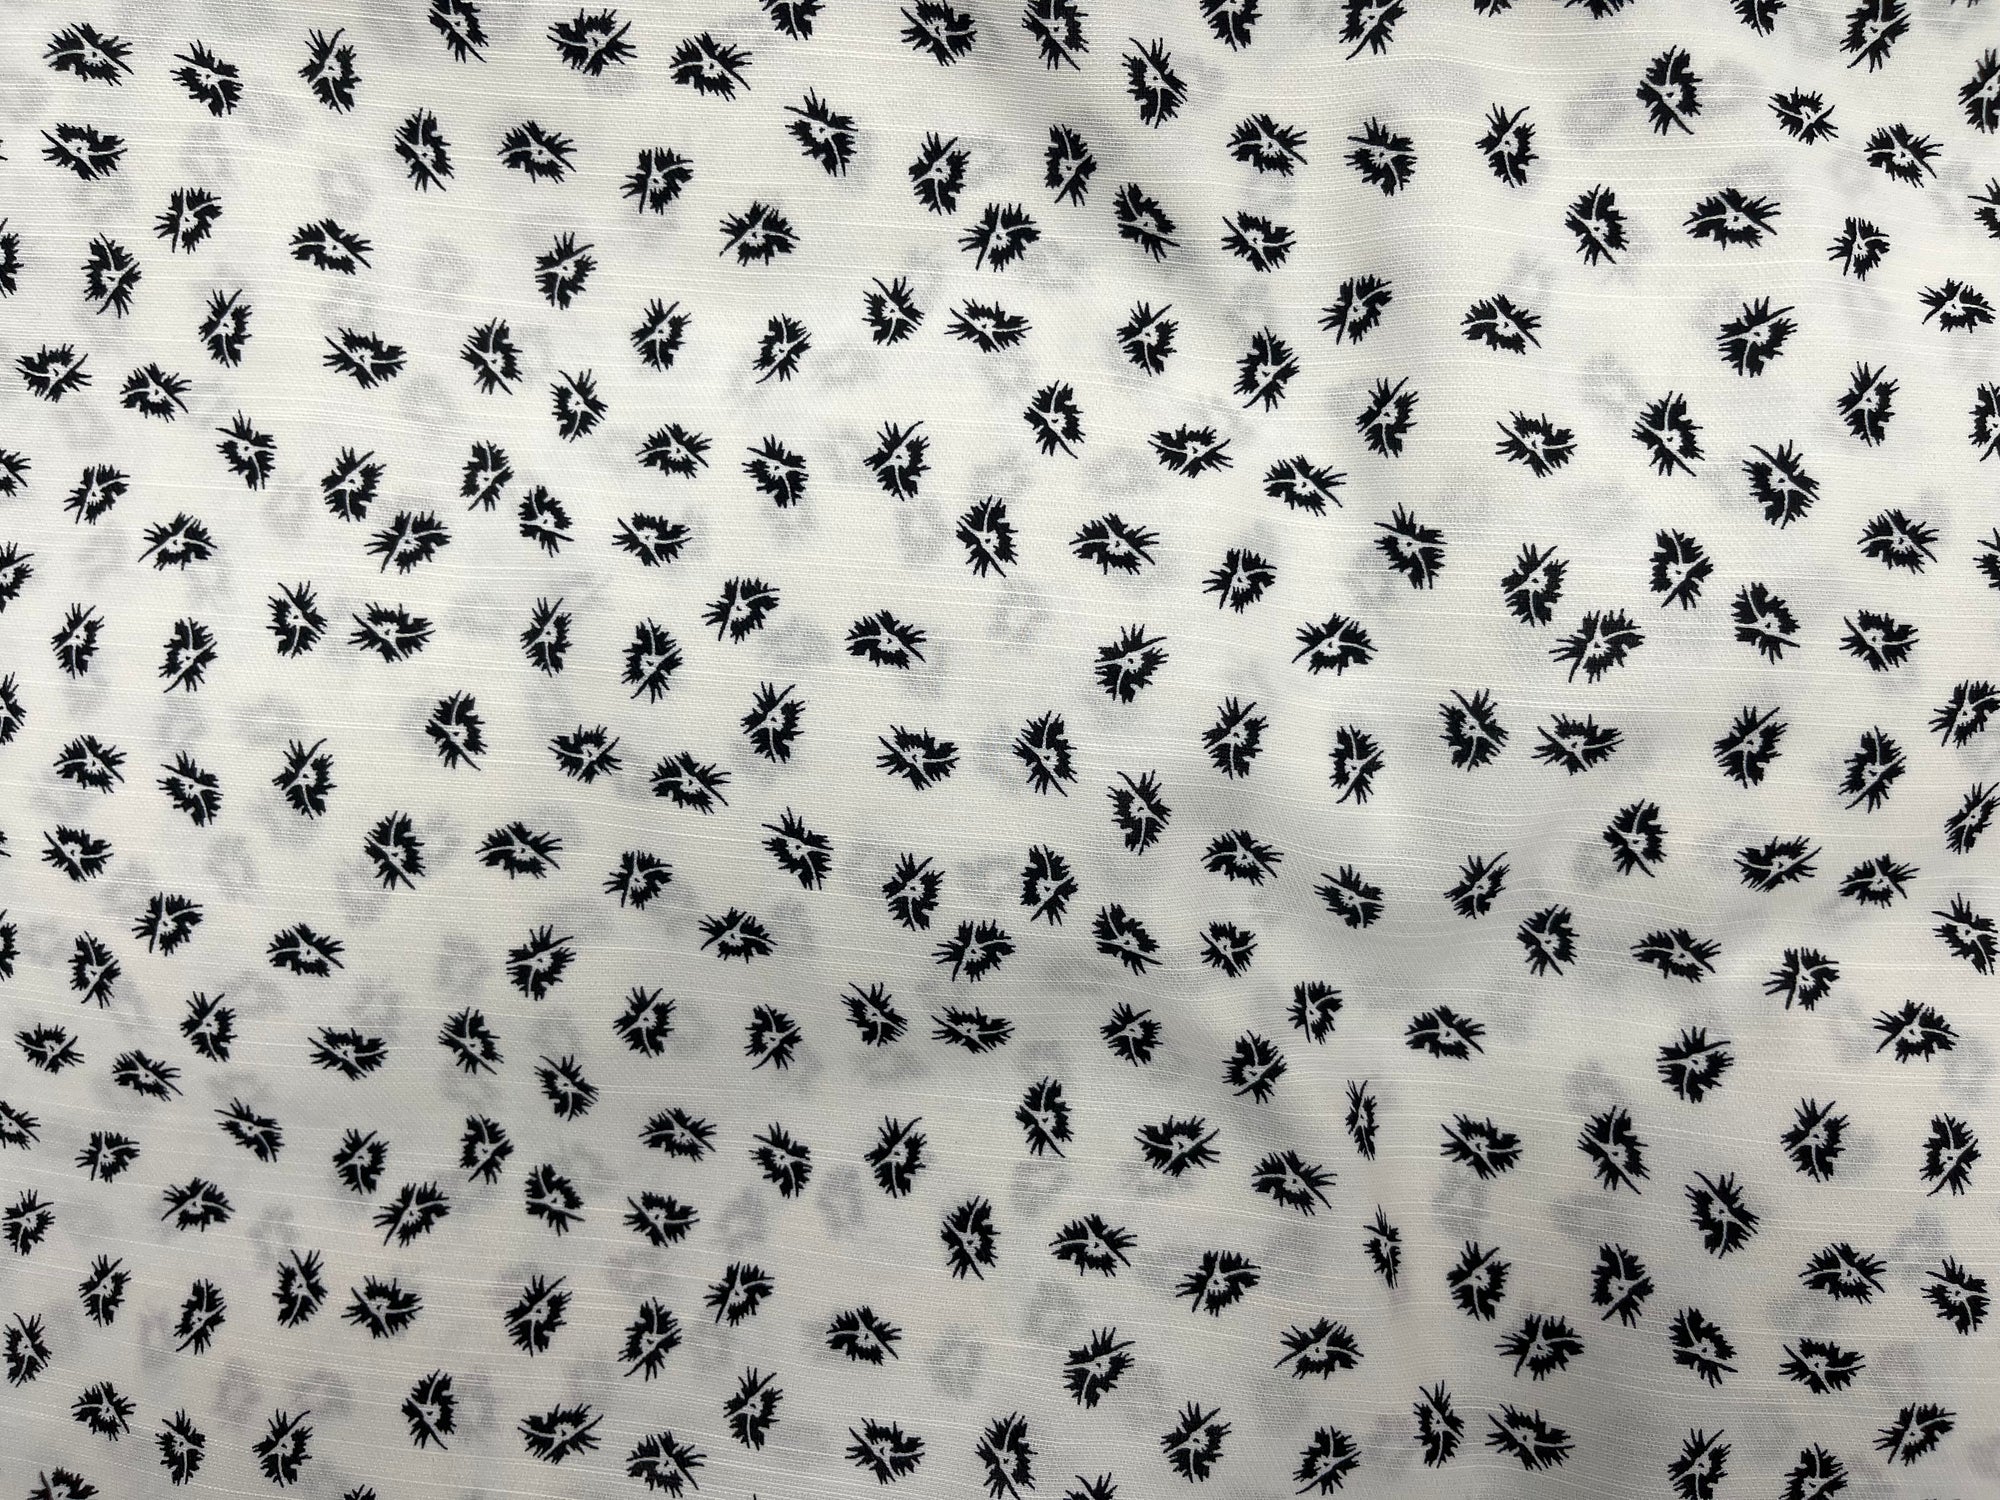 Black White Ditsy  - Clearance Printed Crepe Fabric